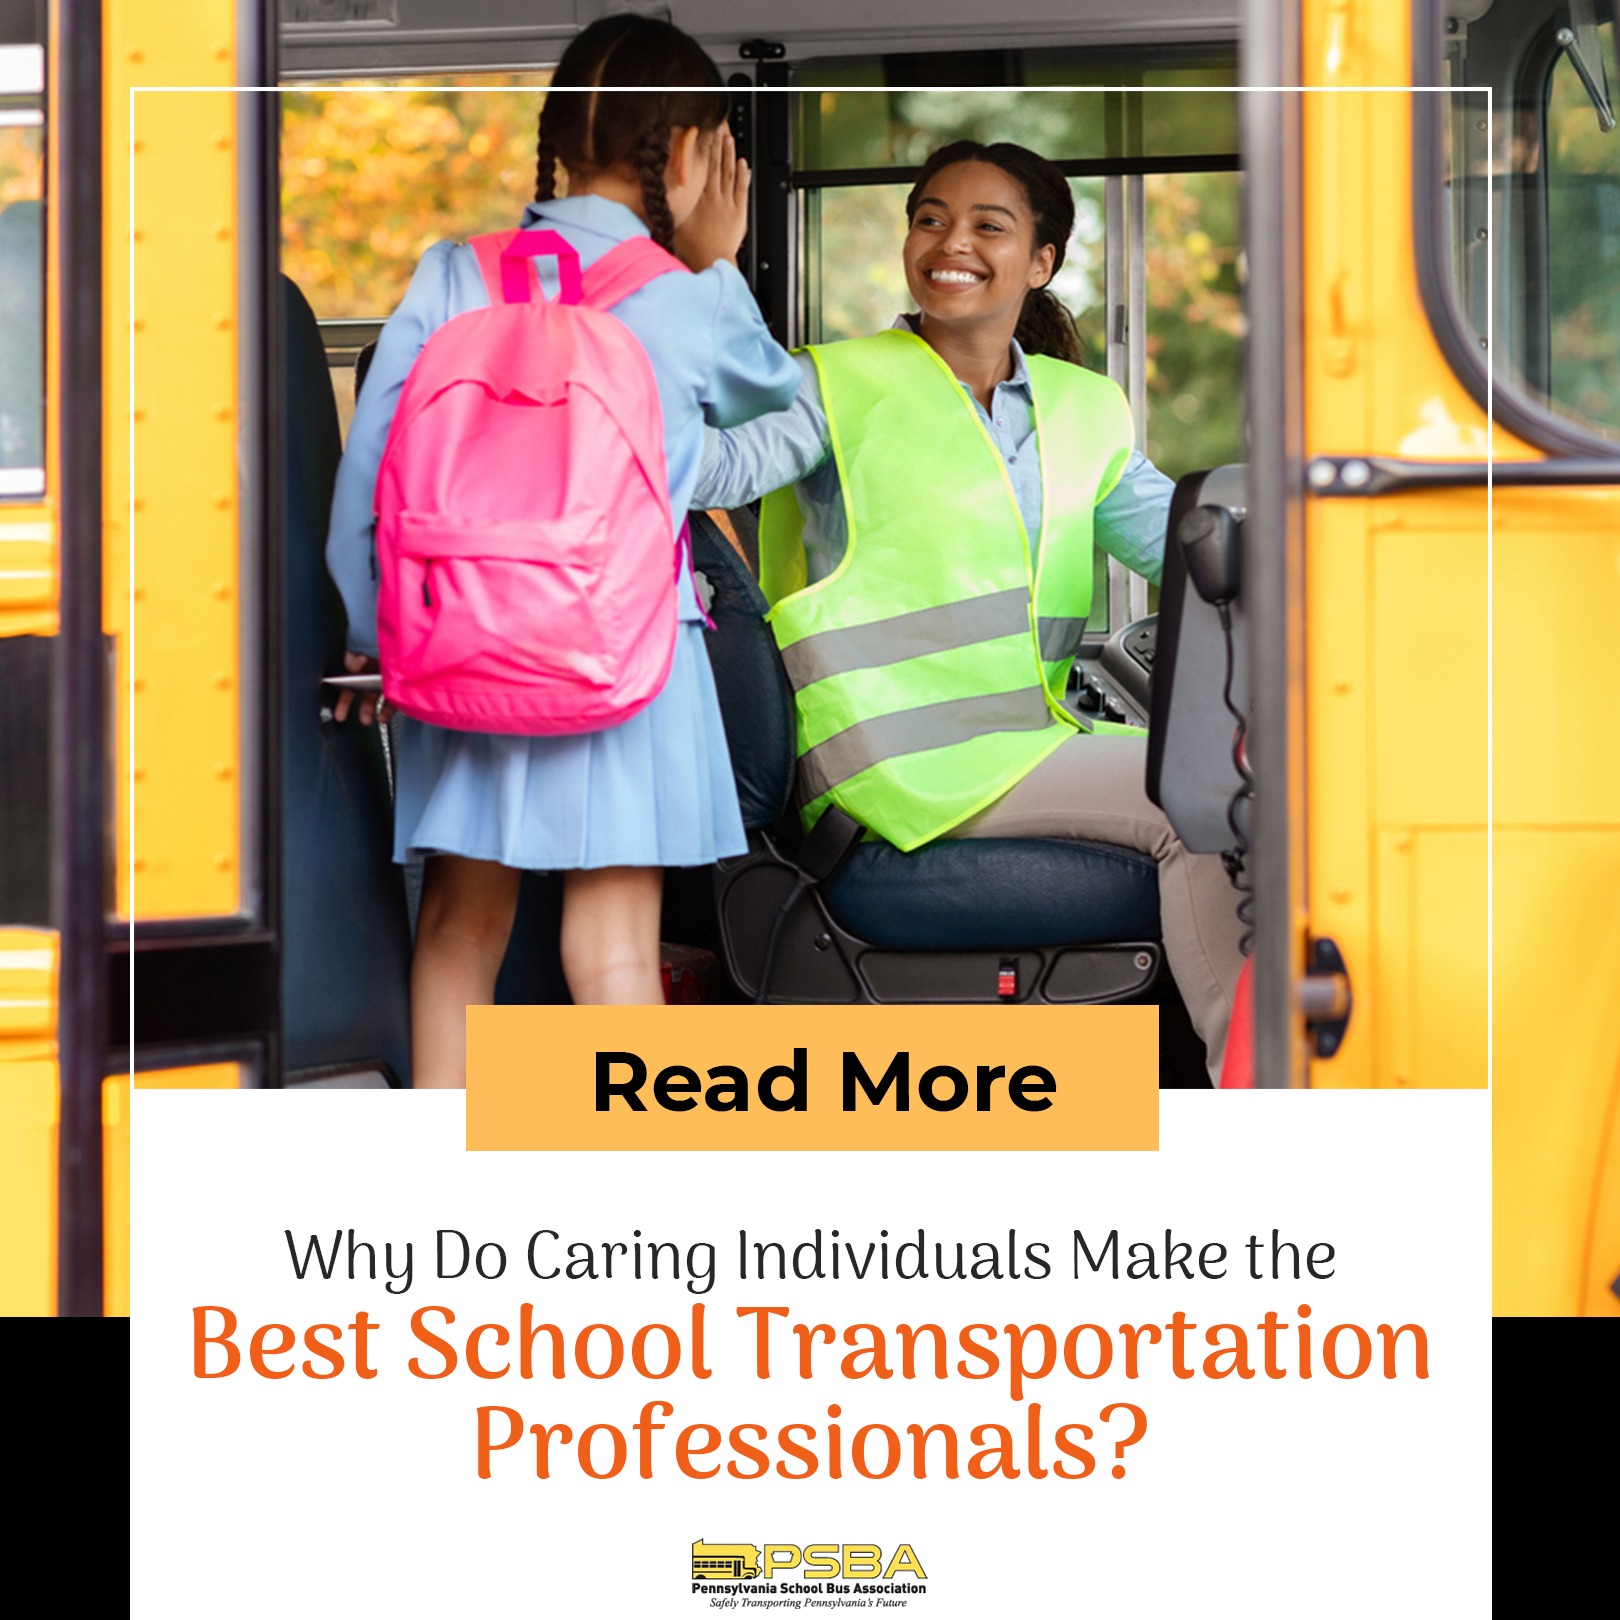 Why Do Caring Individuals Make the Best School Transportation Professionals?